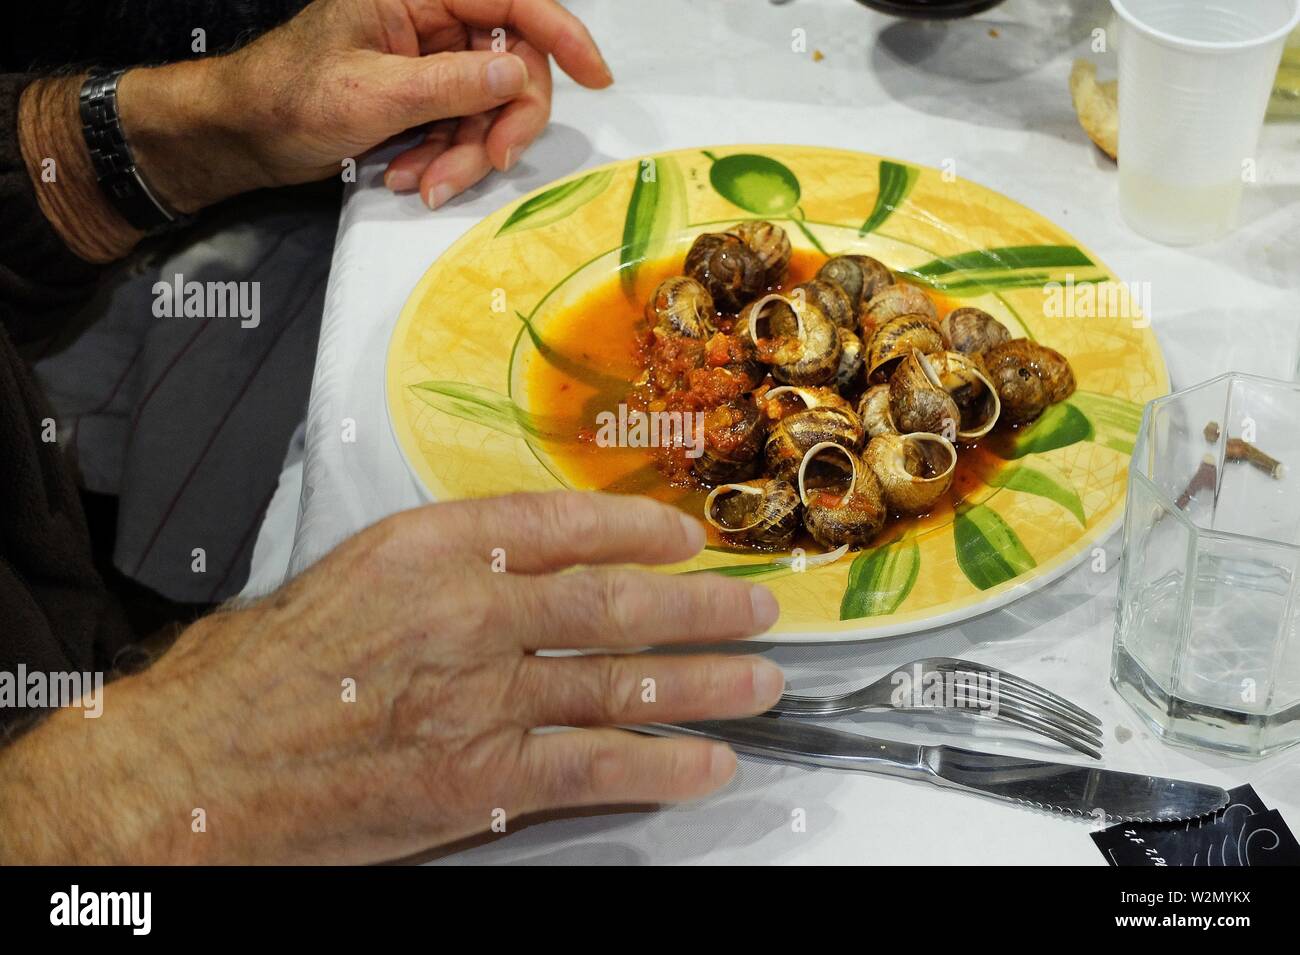 A plate of freshly cooked escargots (snails), a French favorite food. Stock Photo